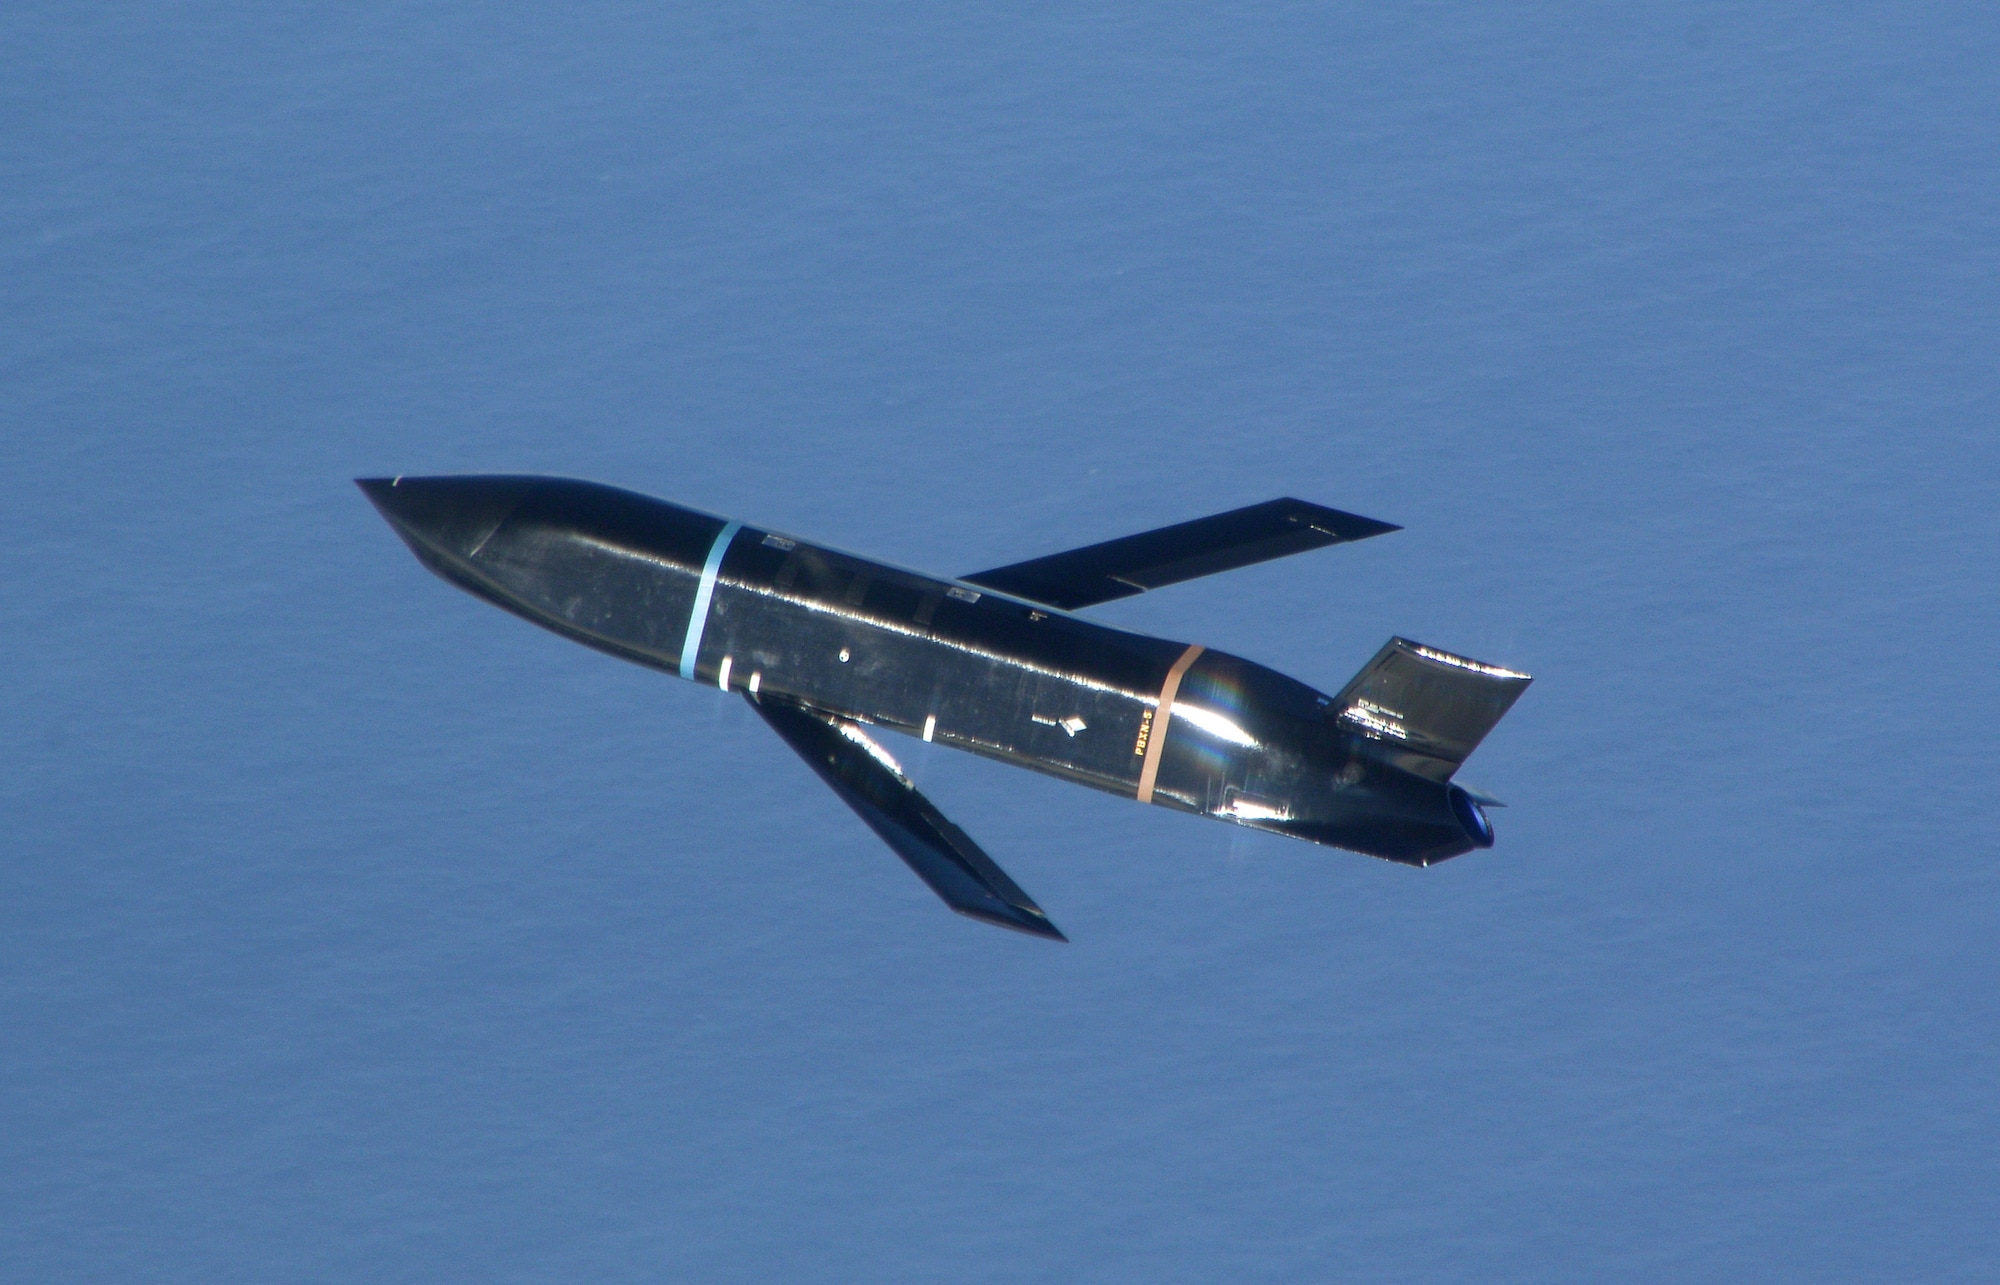 Lockheed Martin successfully fired two production representative Long Range Anti-Ship Missiles (LRASM) from a U.S. Air Force B-1B on May 23, 2018. In the event over the Sea Range at Point Mugu, California, a B-1 bomber from Dyess Air Force Base, Texas, released the pair of LRASMs. The missiles navigated through all planned waypoints, transitioned to mid-course guidance and flew toward the moving maritime target using inputs from the onboard sensors. The missiles then positively identified the intended target and impacted successfully. (Courtesy Photo)